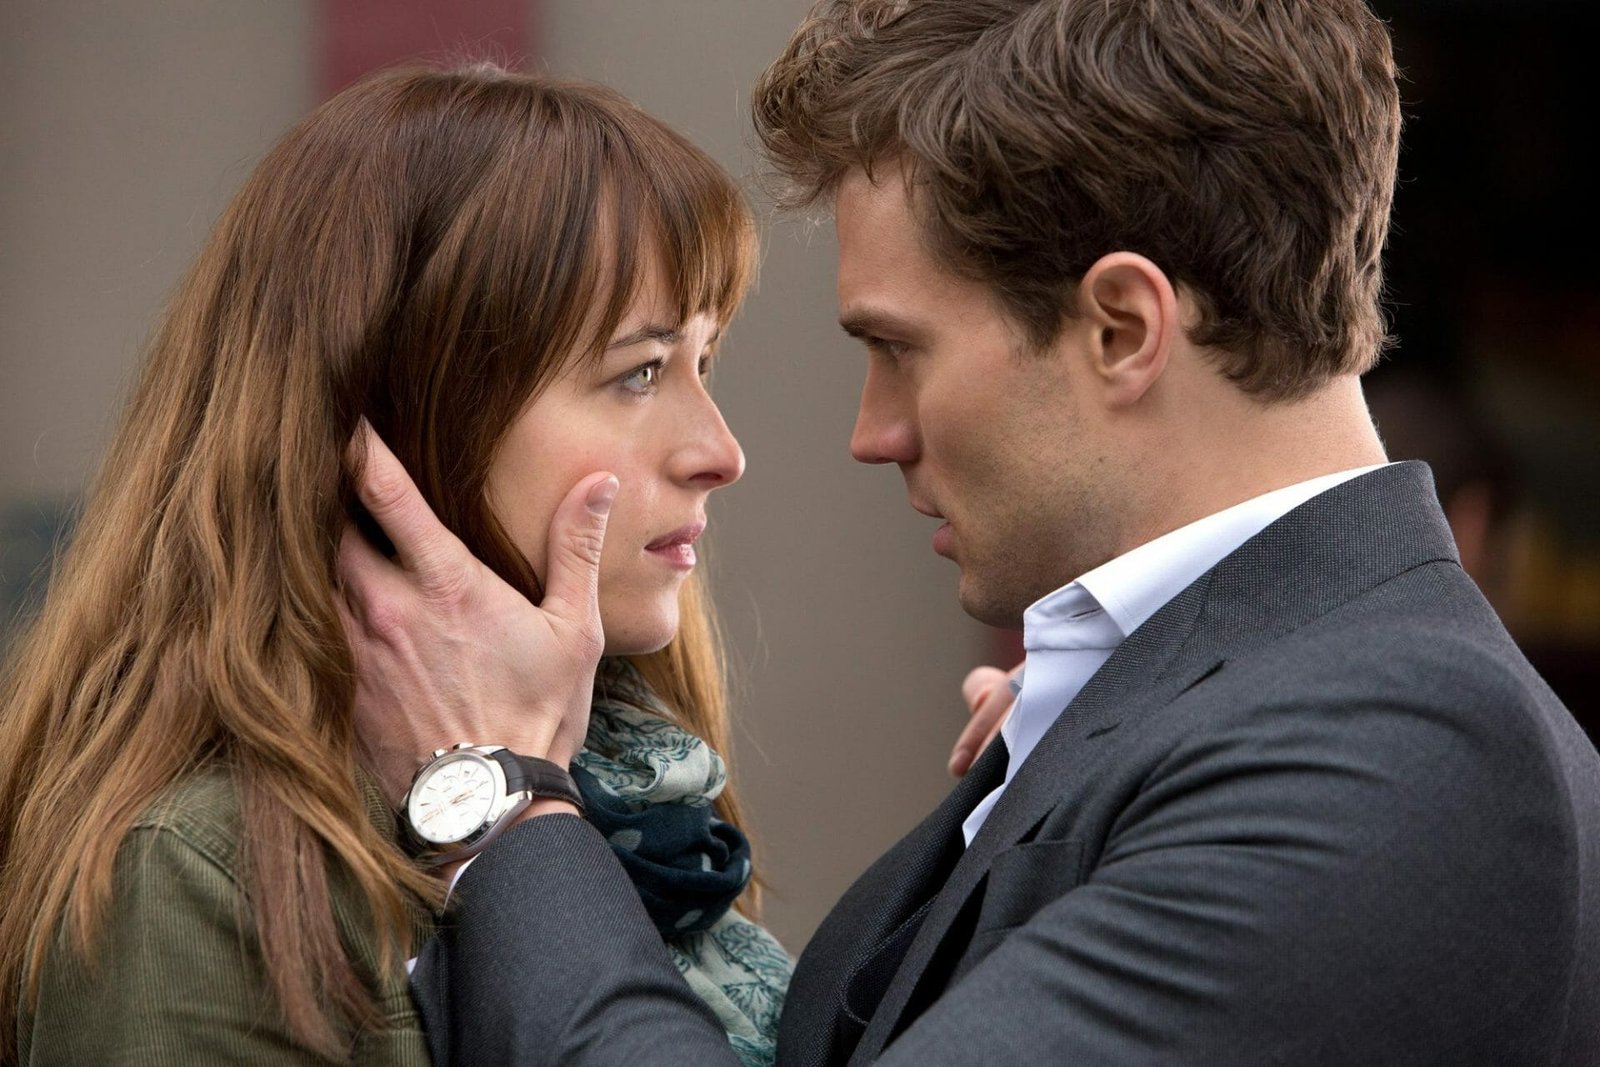 movies on rich people: Fifty Shades of Grey